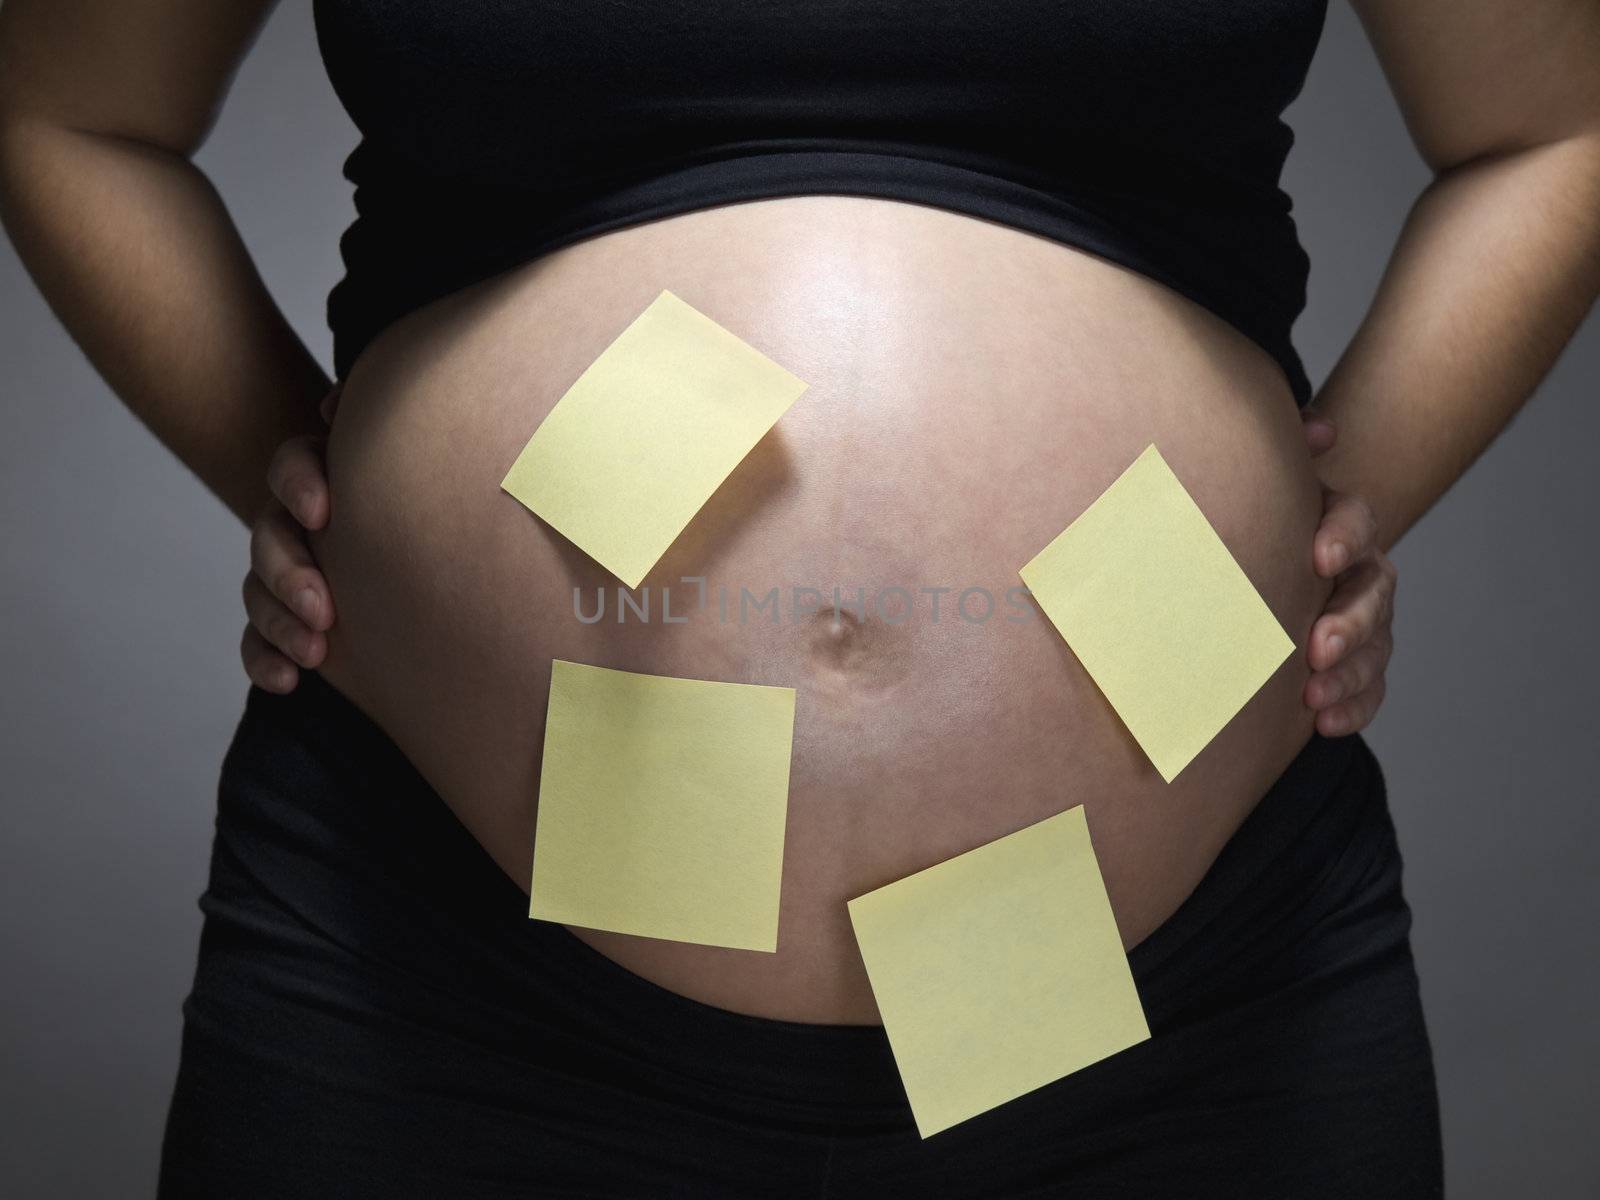 Pregnant woman with blank sticky notes on her belly.